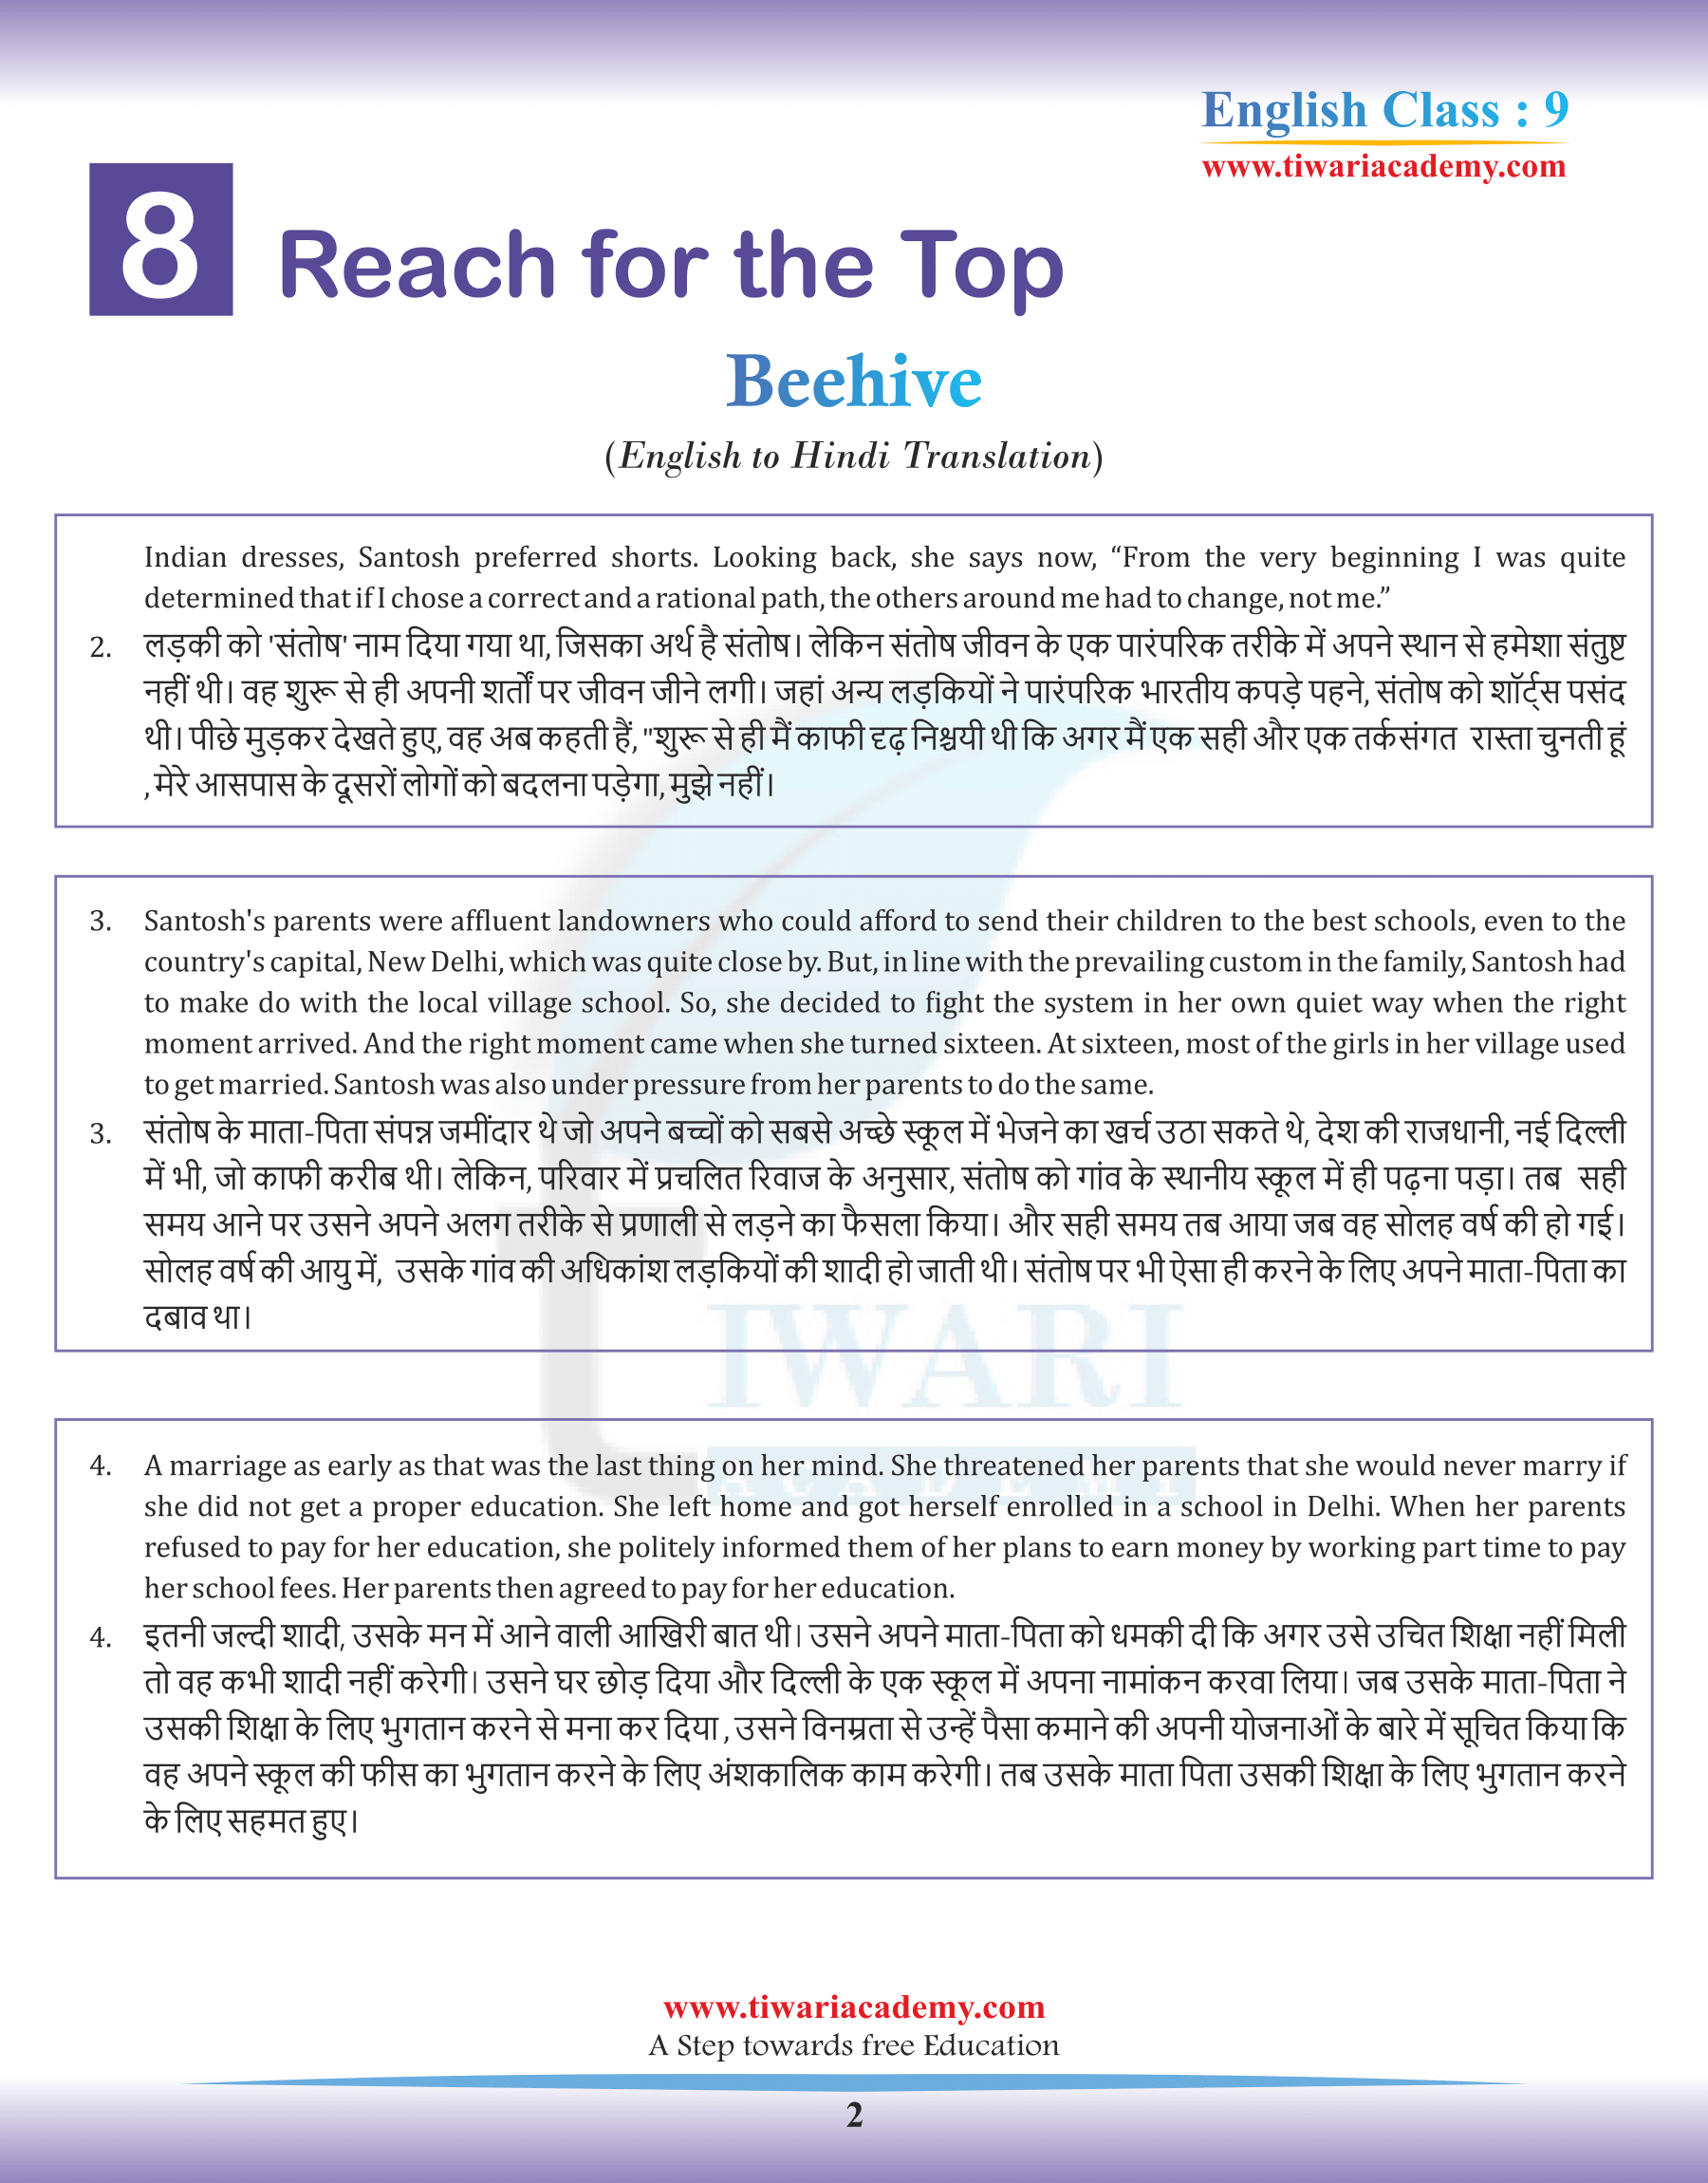 Class 9 English Beehive Chapter 8 Reach for the Top Hindi Translation Version